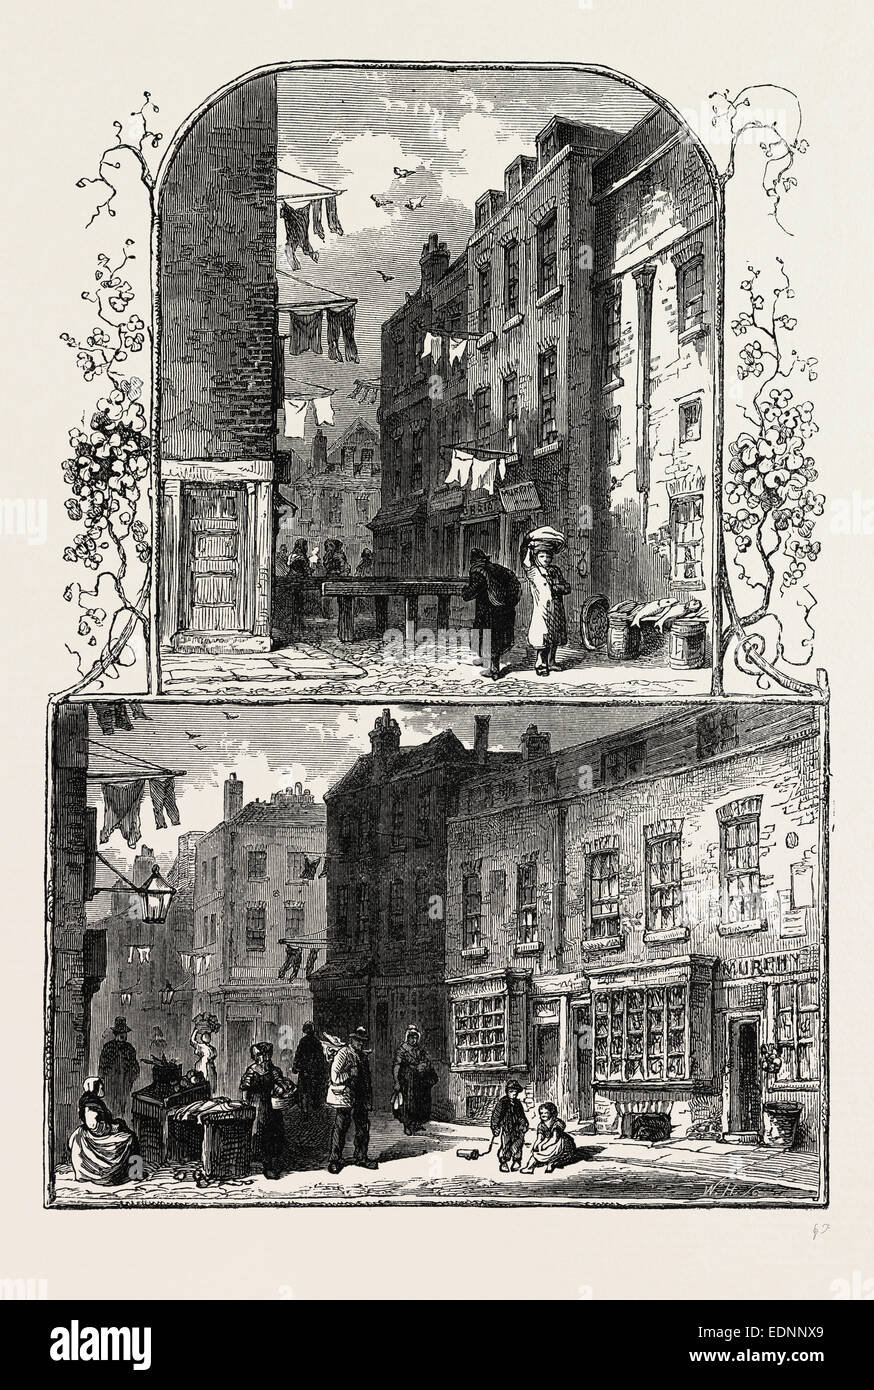 Views In The Rookery St Giless London Uk 19th Century Engraving